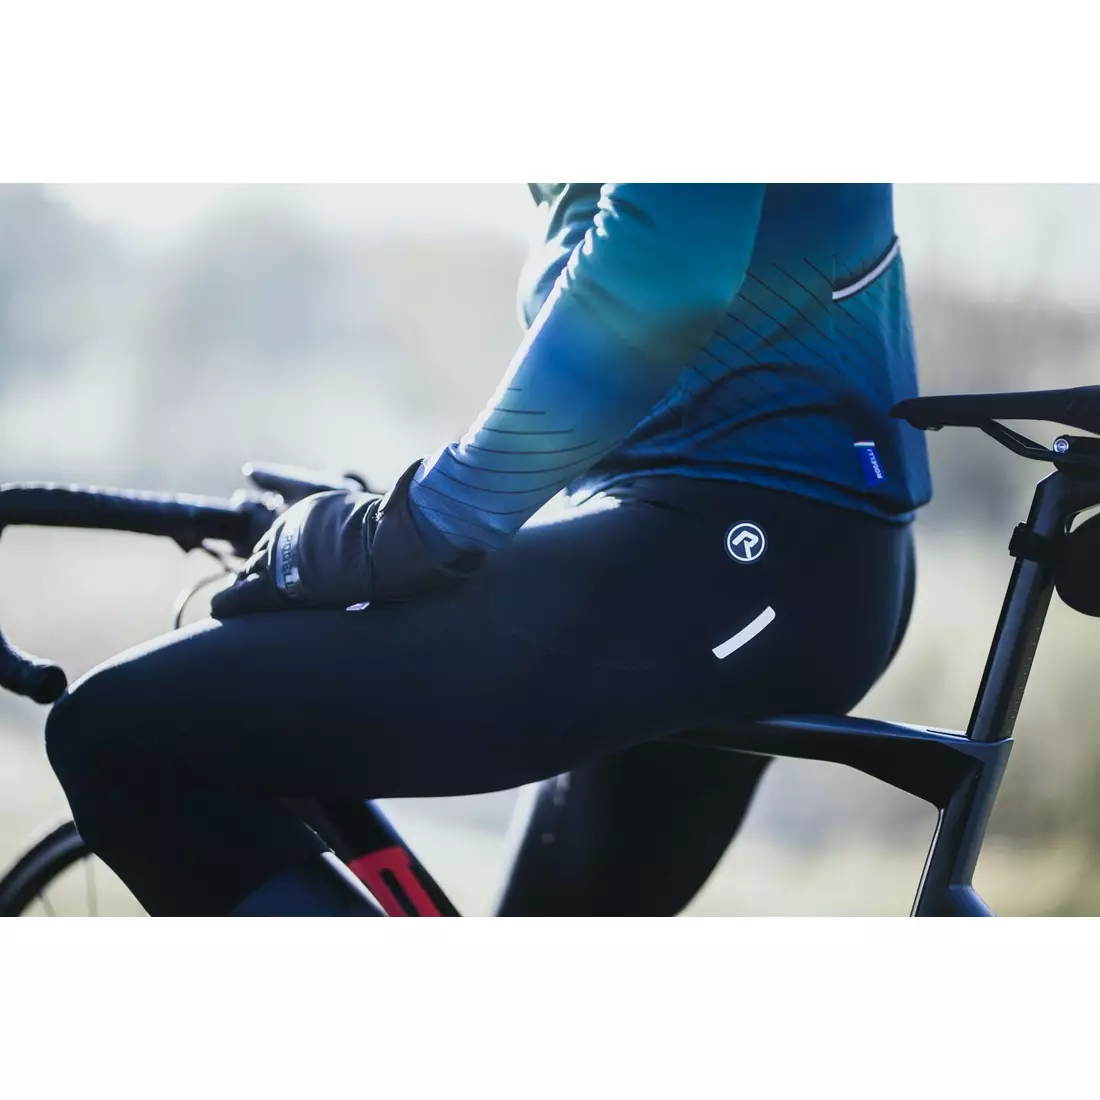 NEW Men Thermal Pants Tights Winter Cycling Padded Trousers Bike Bicycle  Legging | eBay